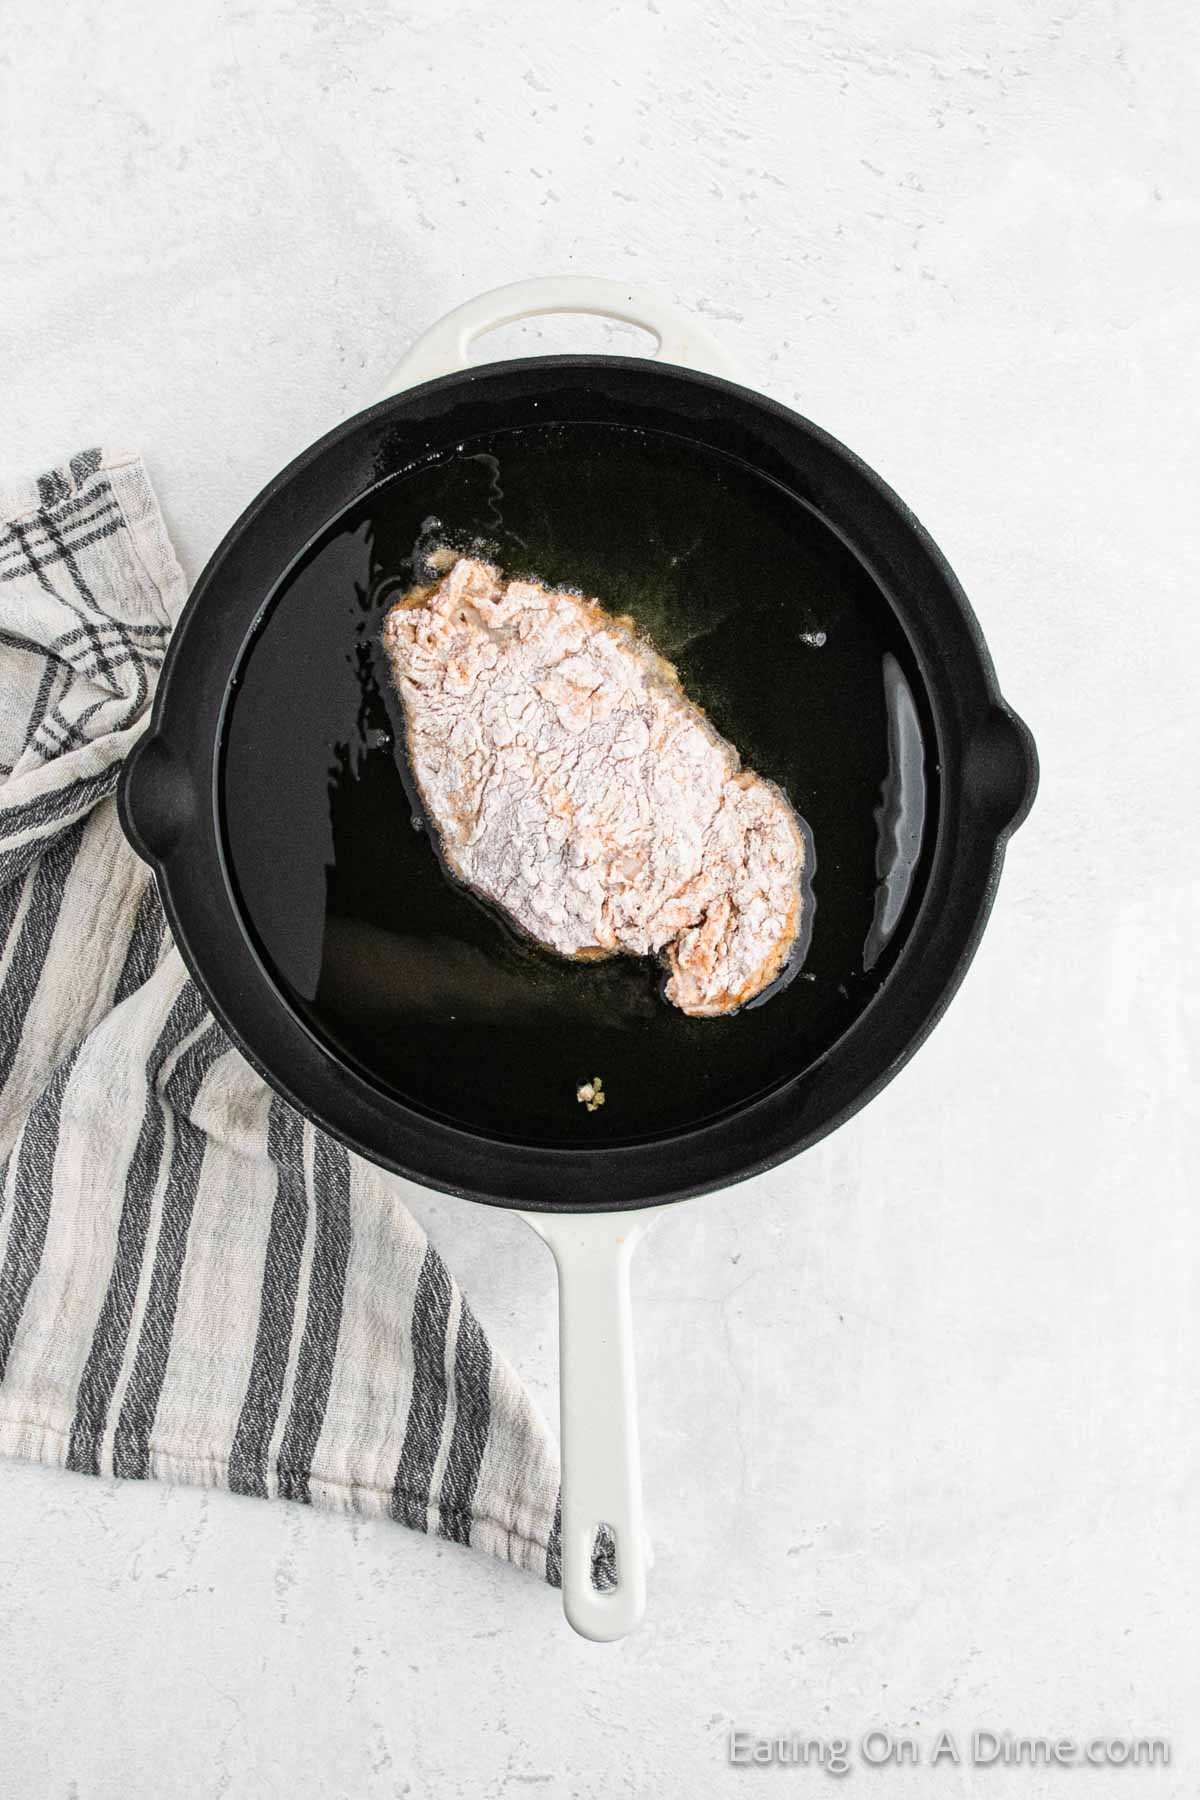 Placing the flour covered chicken breast in a cast iron skillet with oil